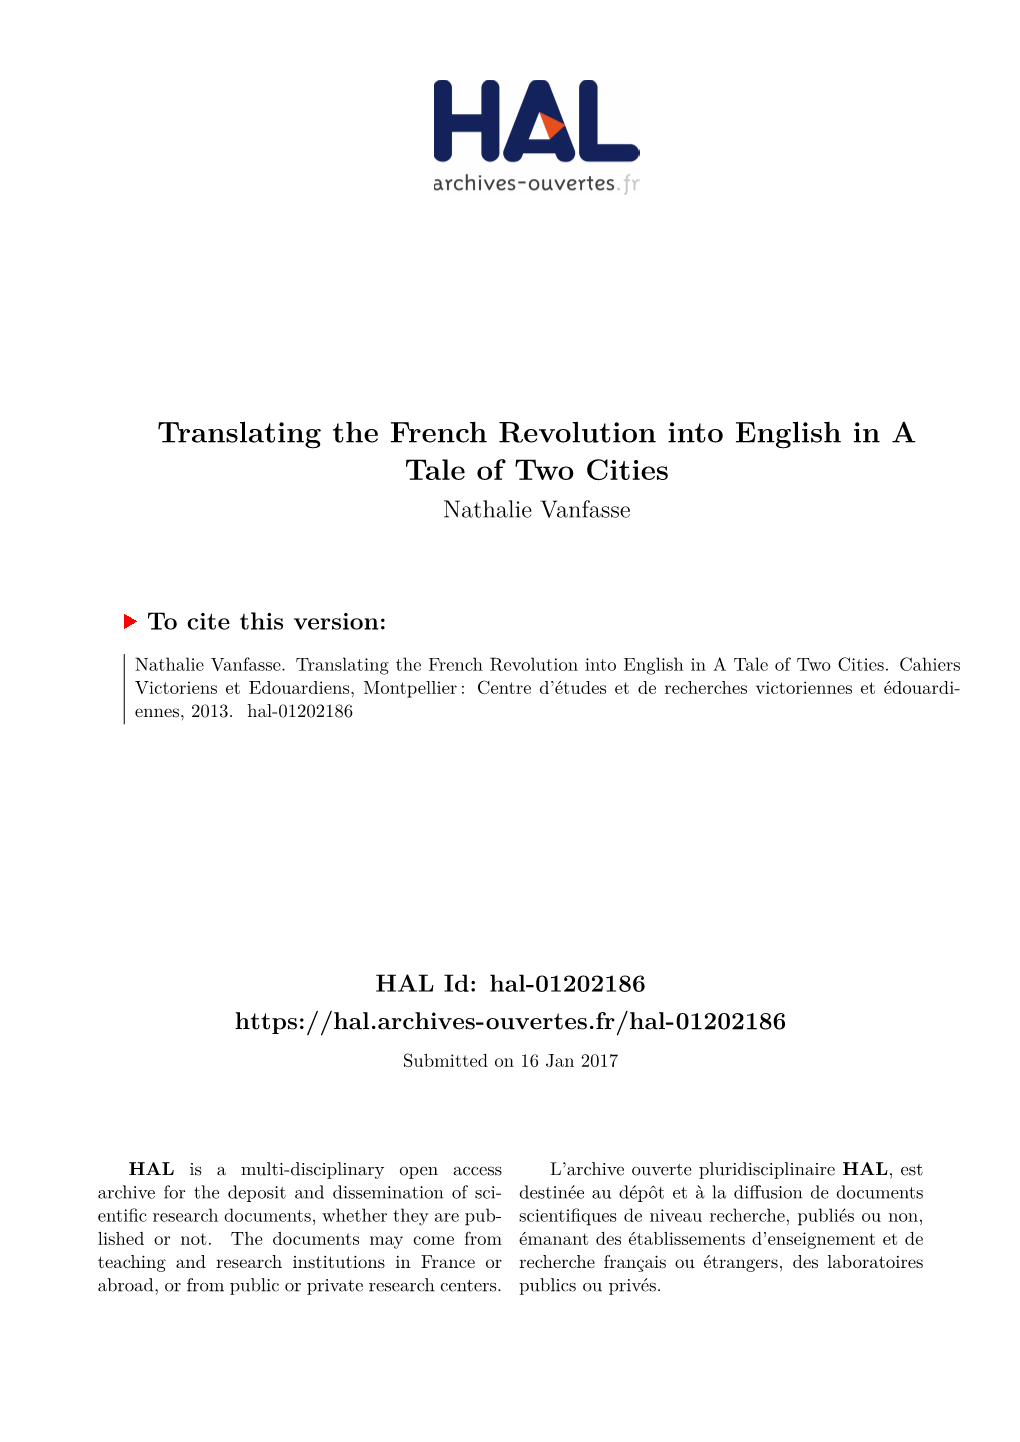 Translating the French Revolution Into English in a Tale of Two Cities Nathalie Vanfasse